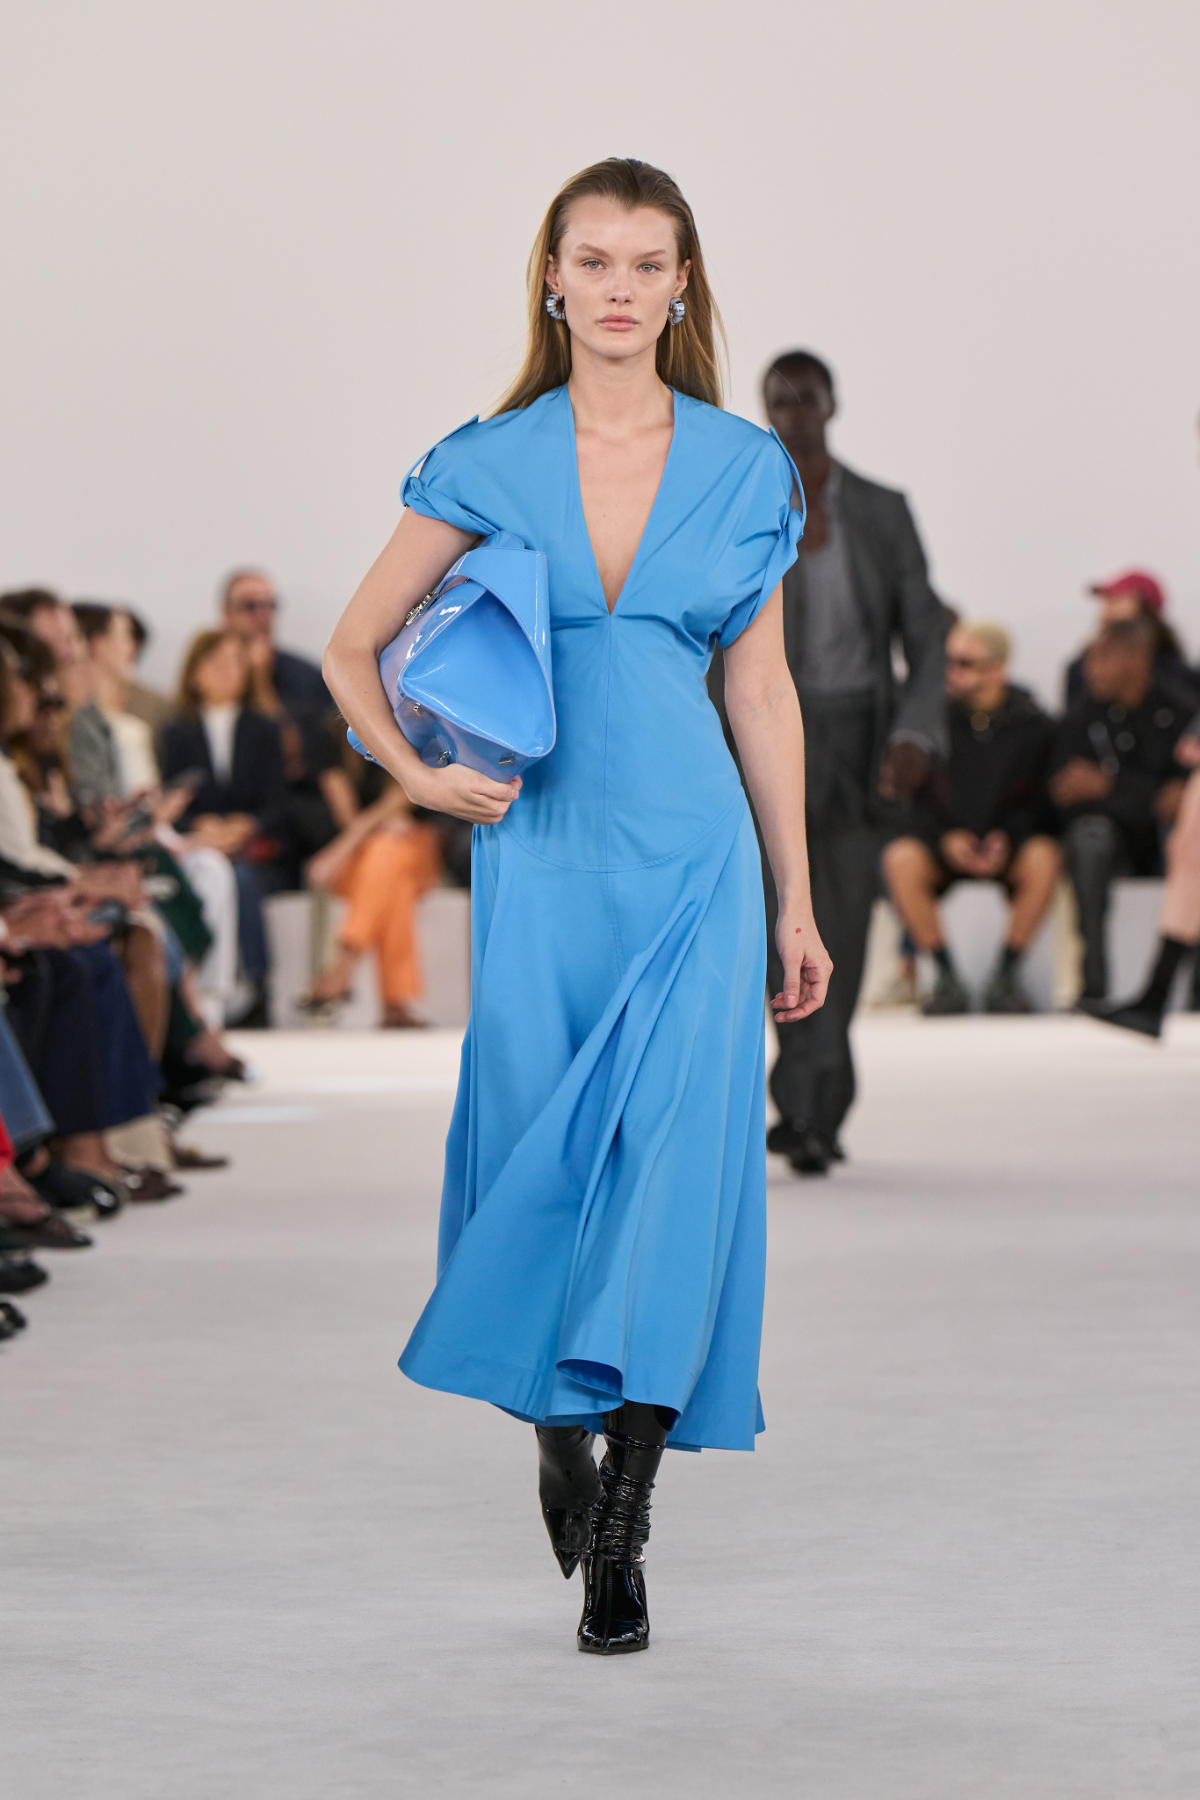 Ferragamo 2024 Spring Summer Womens Runway Looks, Fashion Forward Forecast, Curated Fashion Week Runway Shows & Season Collections, Trendsetting  Styles by Designer Brands